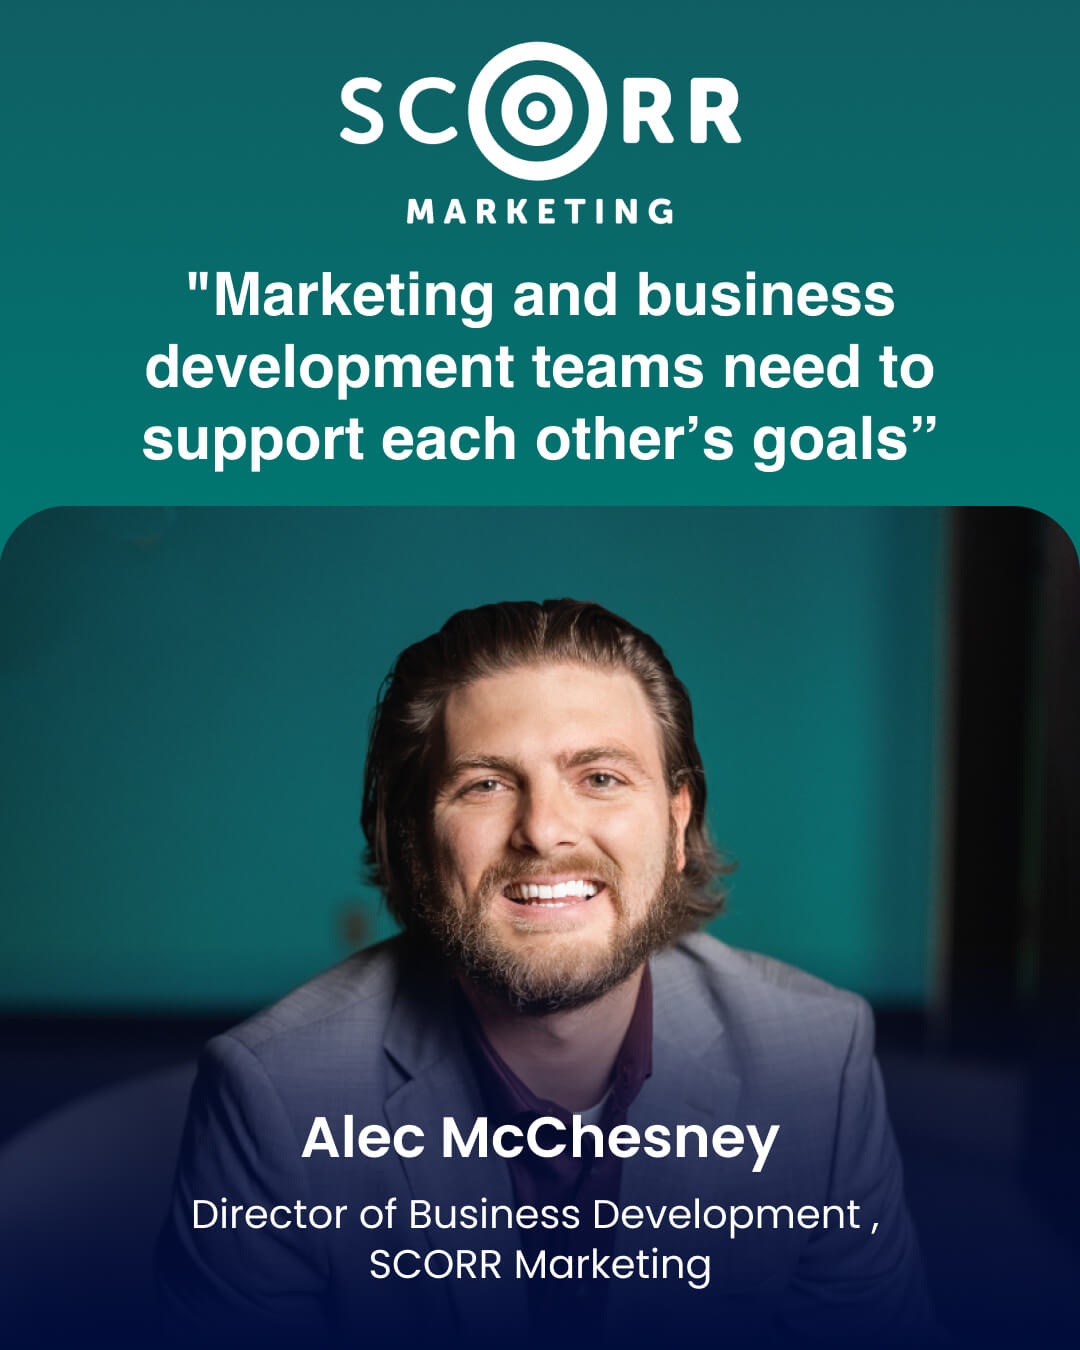 Marketing and business development teams need to support each other’s goals”